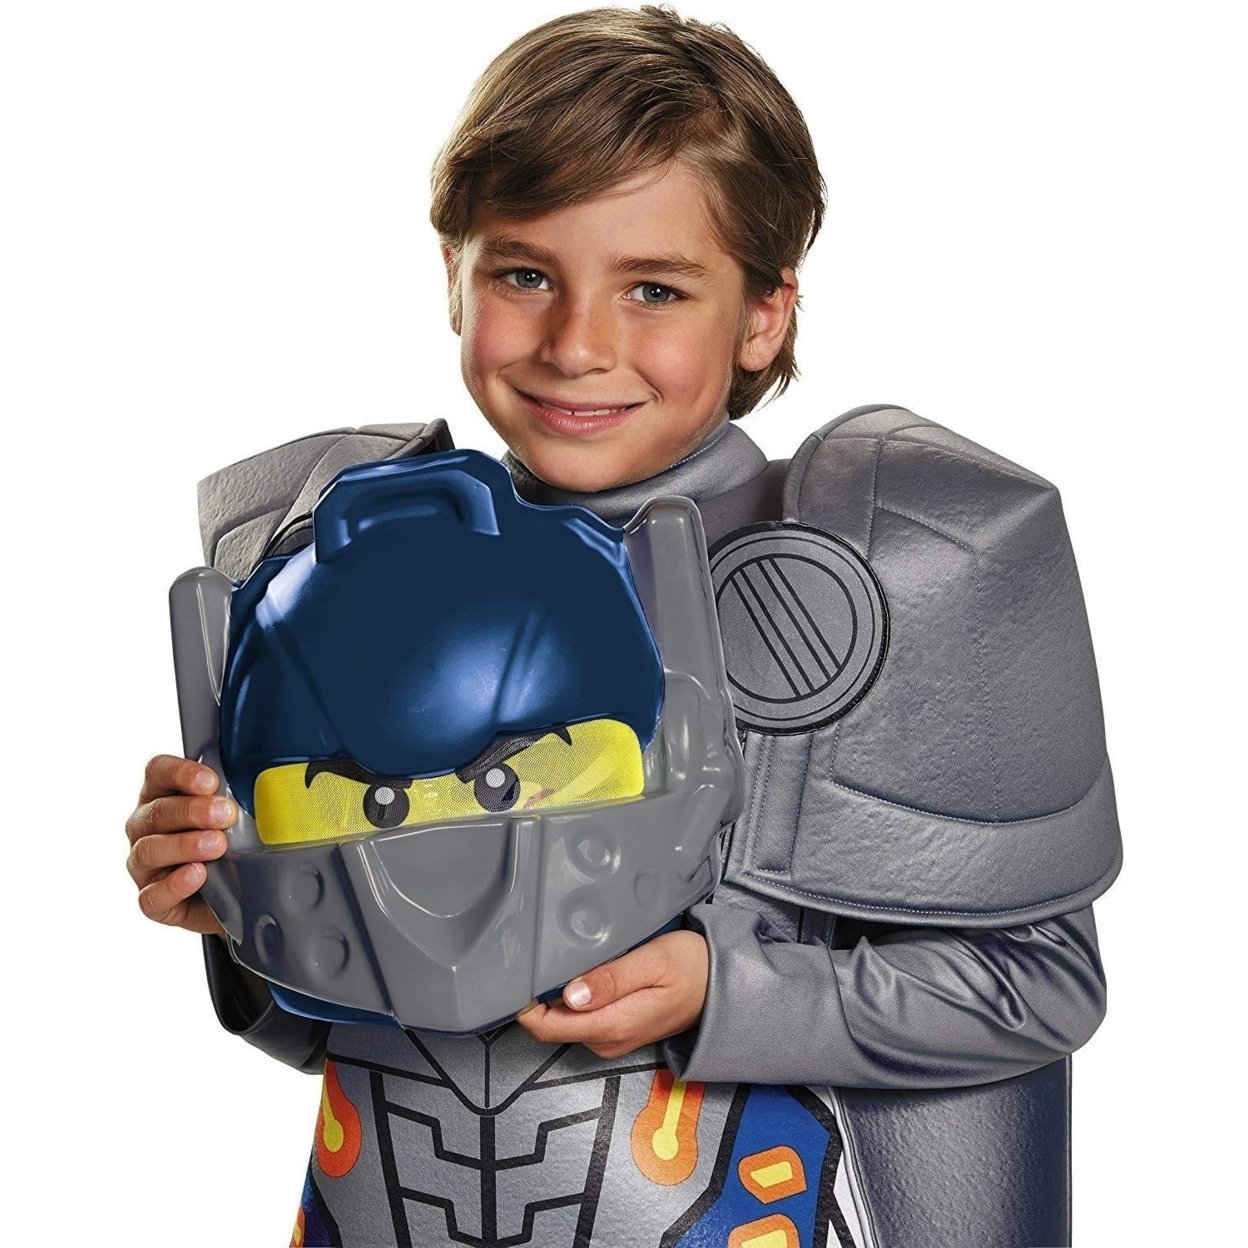 Lego Nexo Knights Clay Prestige Deluxe Size S 4/6 Boys Costume Disguise